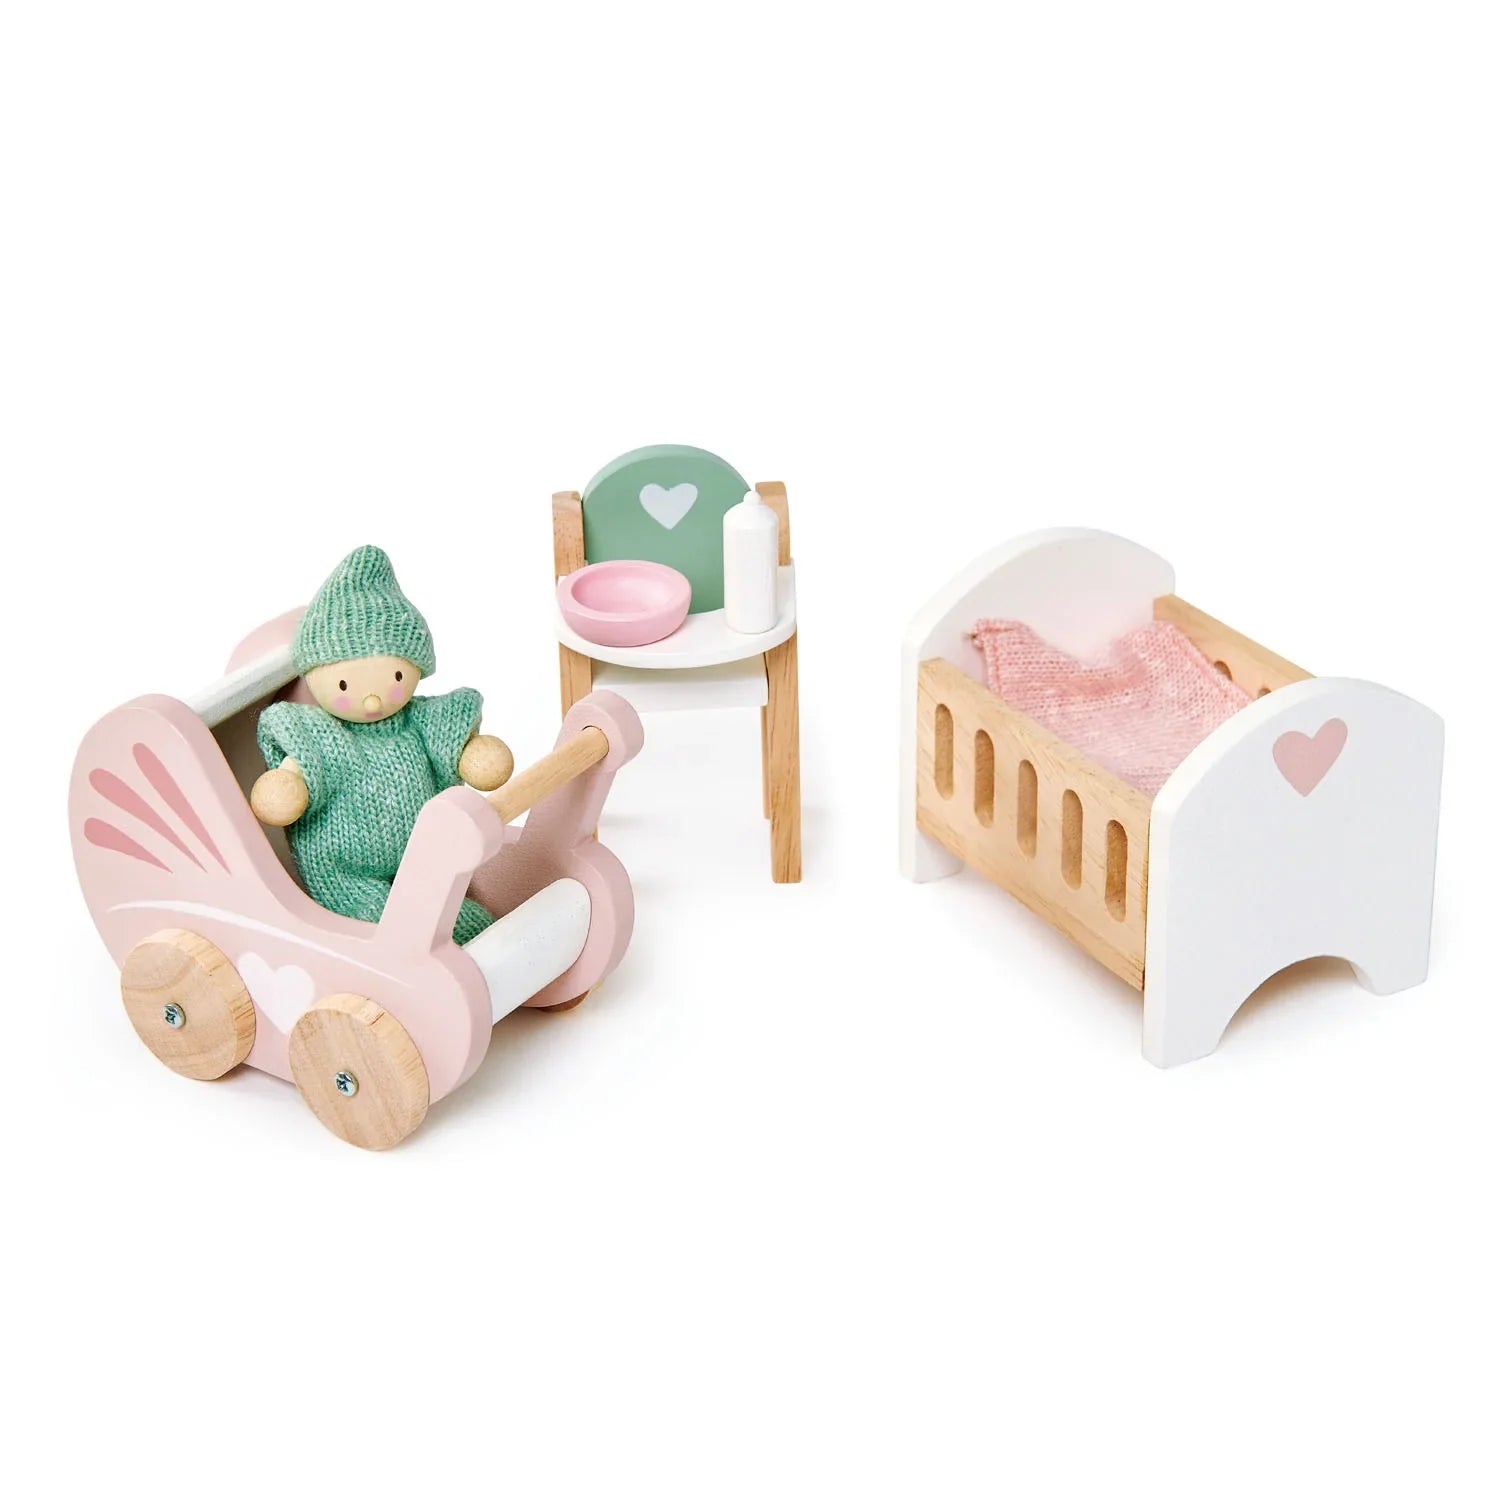 Tender Leaf Toys: wooden dollhouse furniture Baby's room